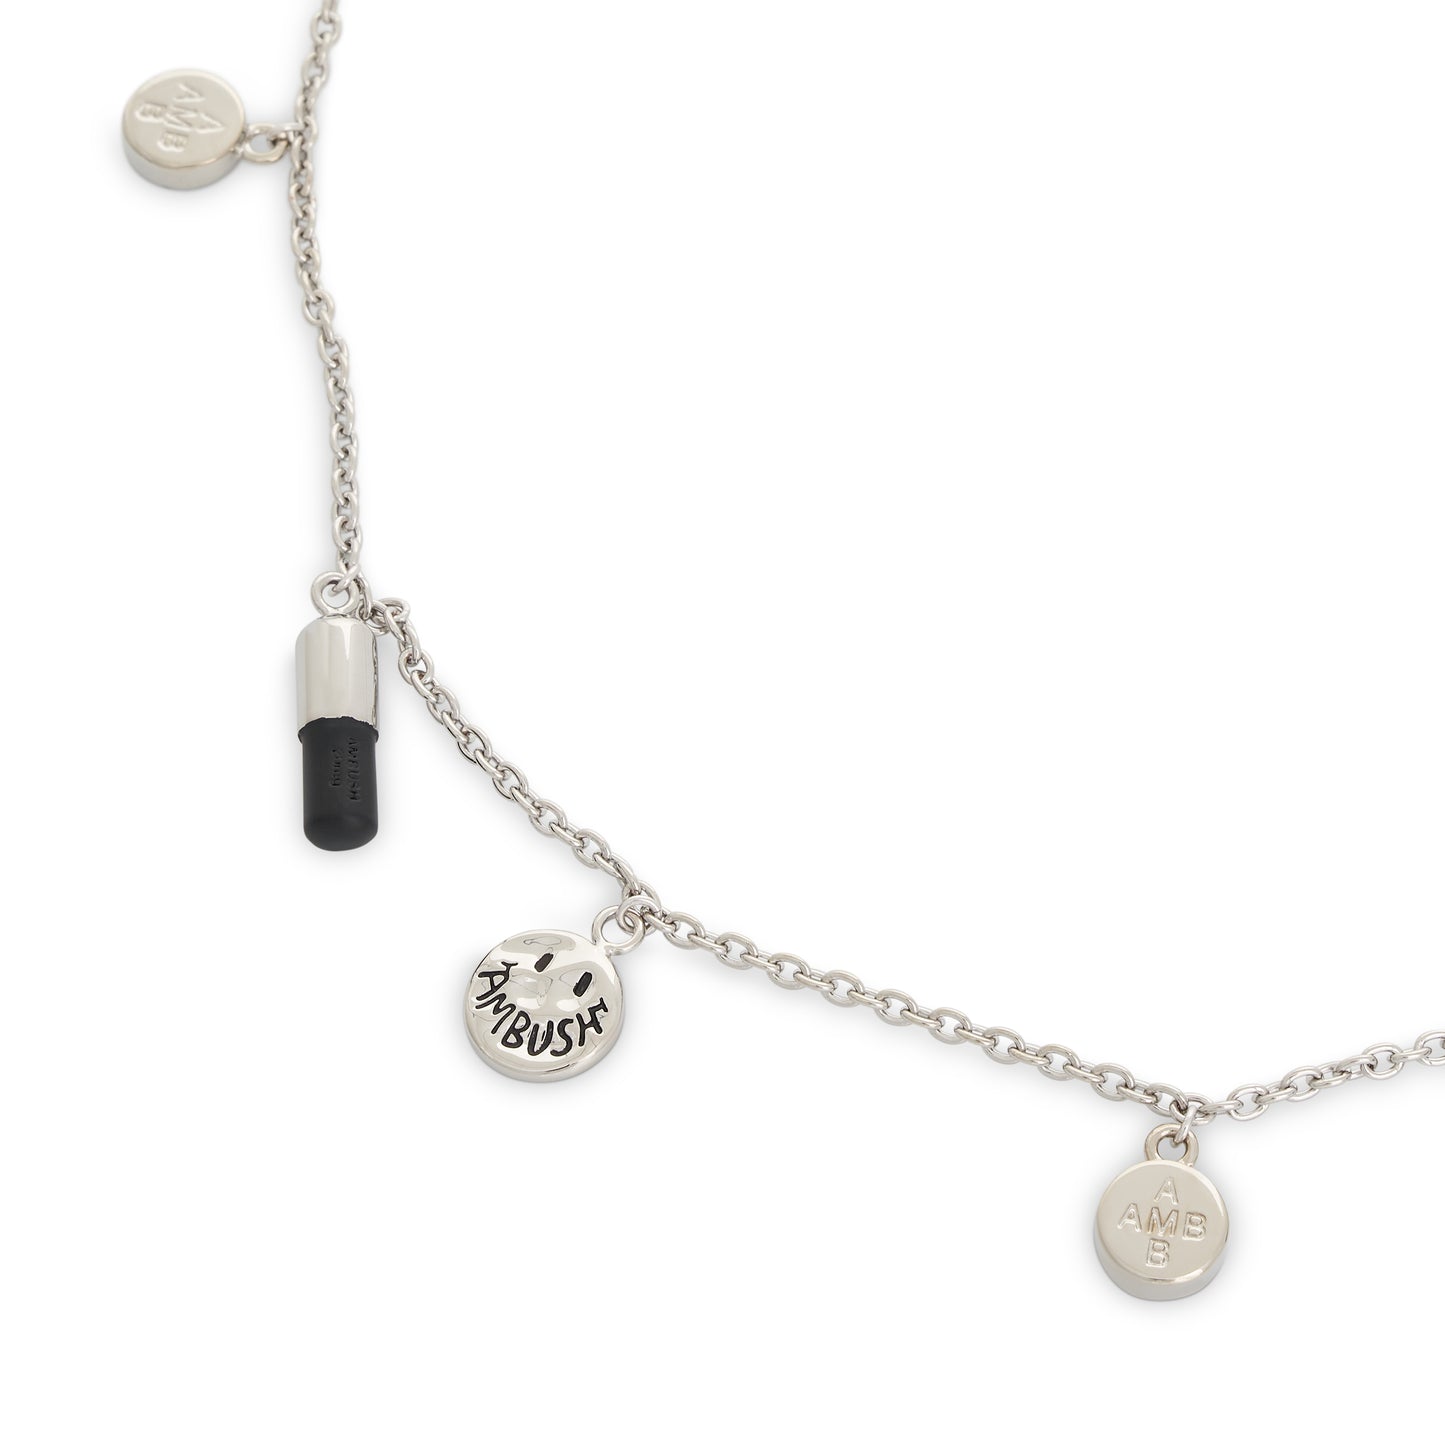 Multipill Charm Necklace in Silver/Black